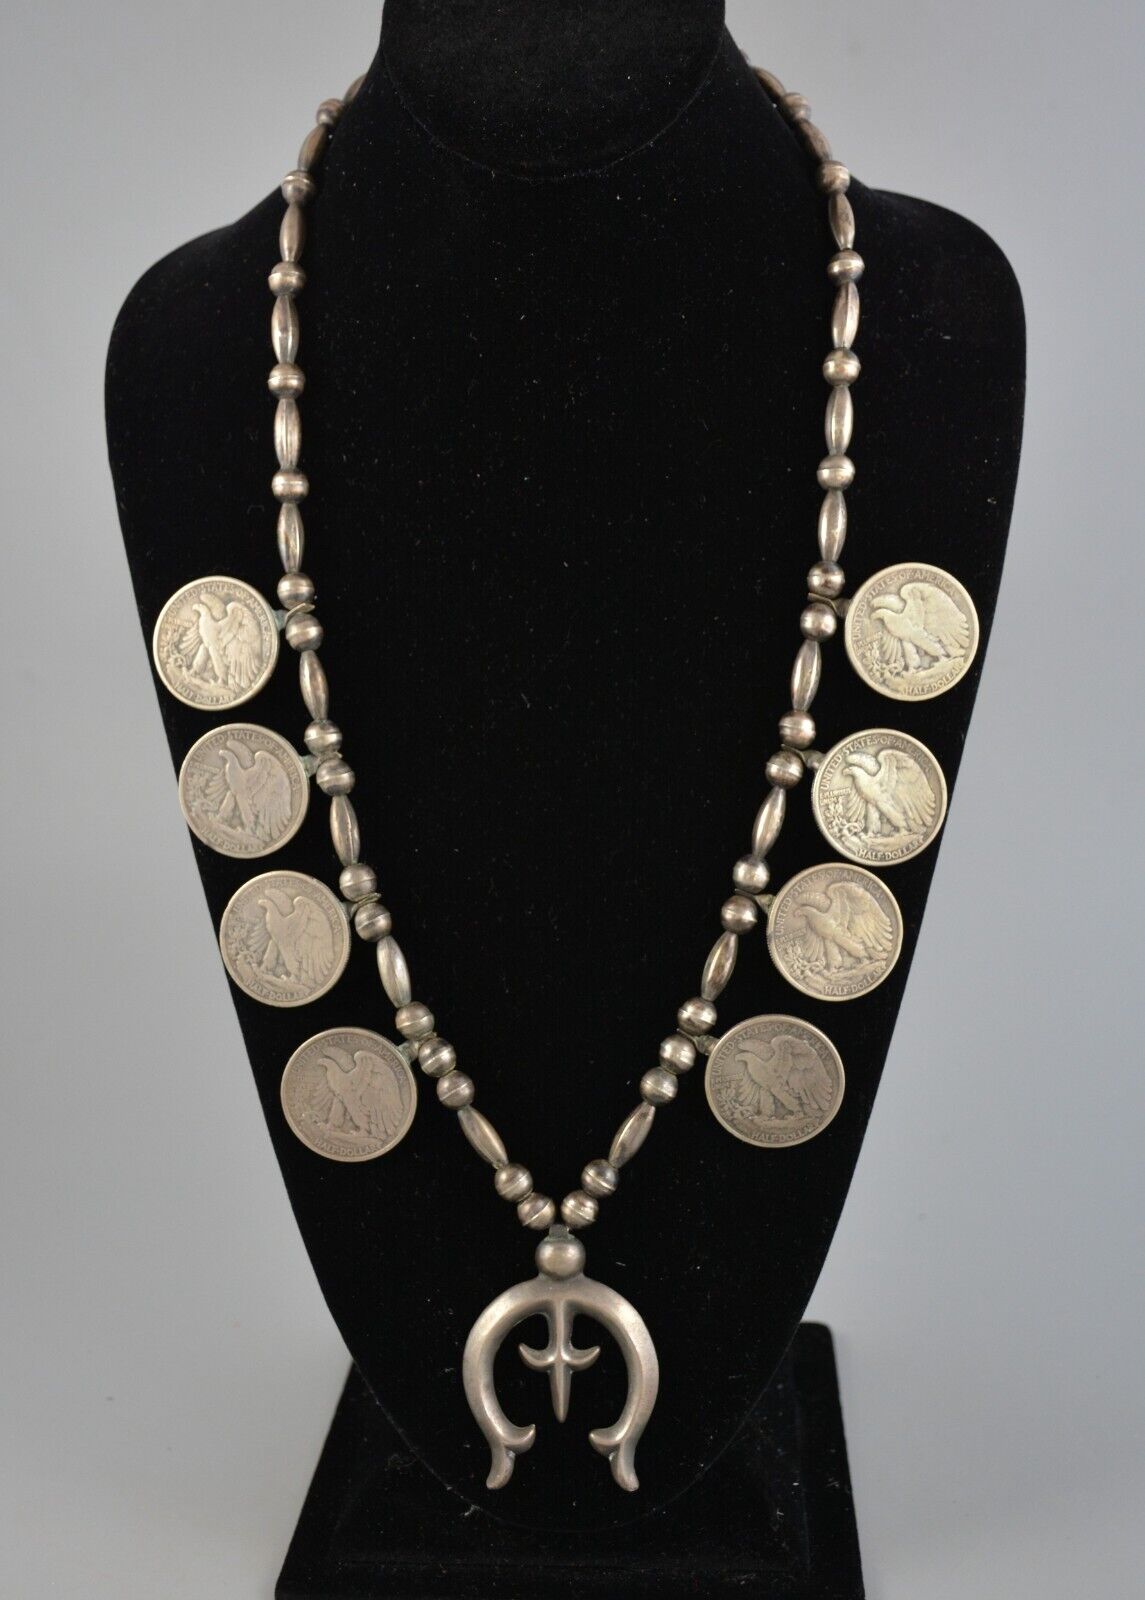 Old Pawn Navajo Squash Necklace with Old Silver Coins & Silver Cast Naja